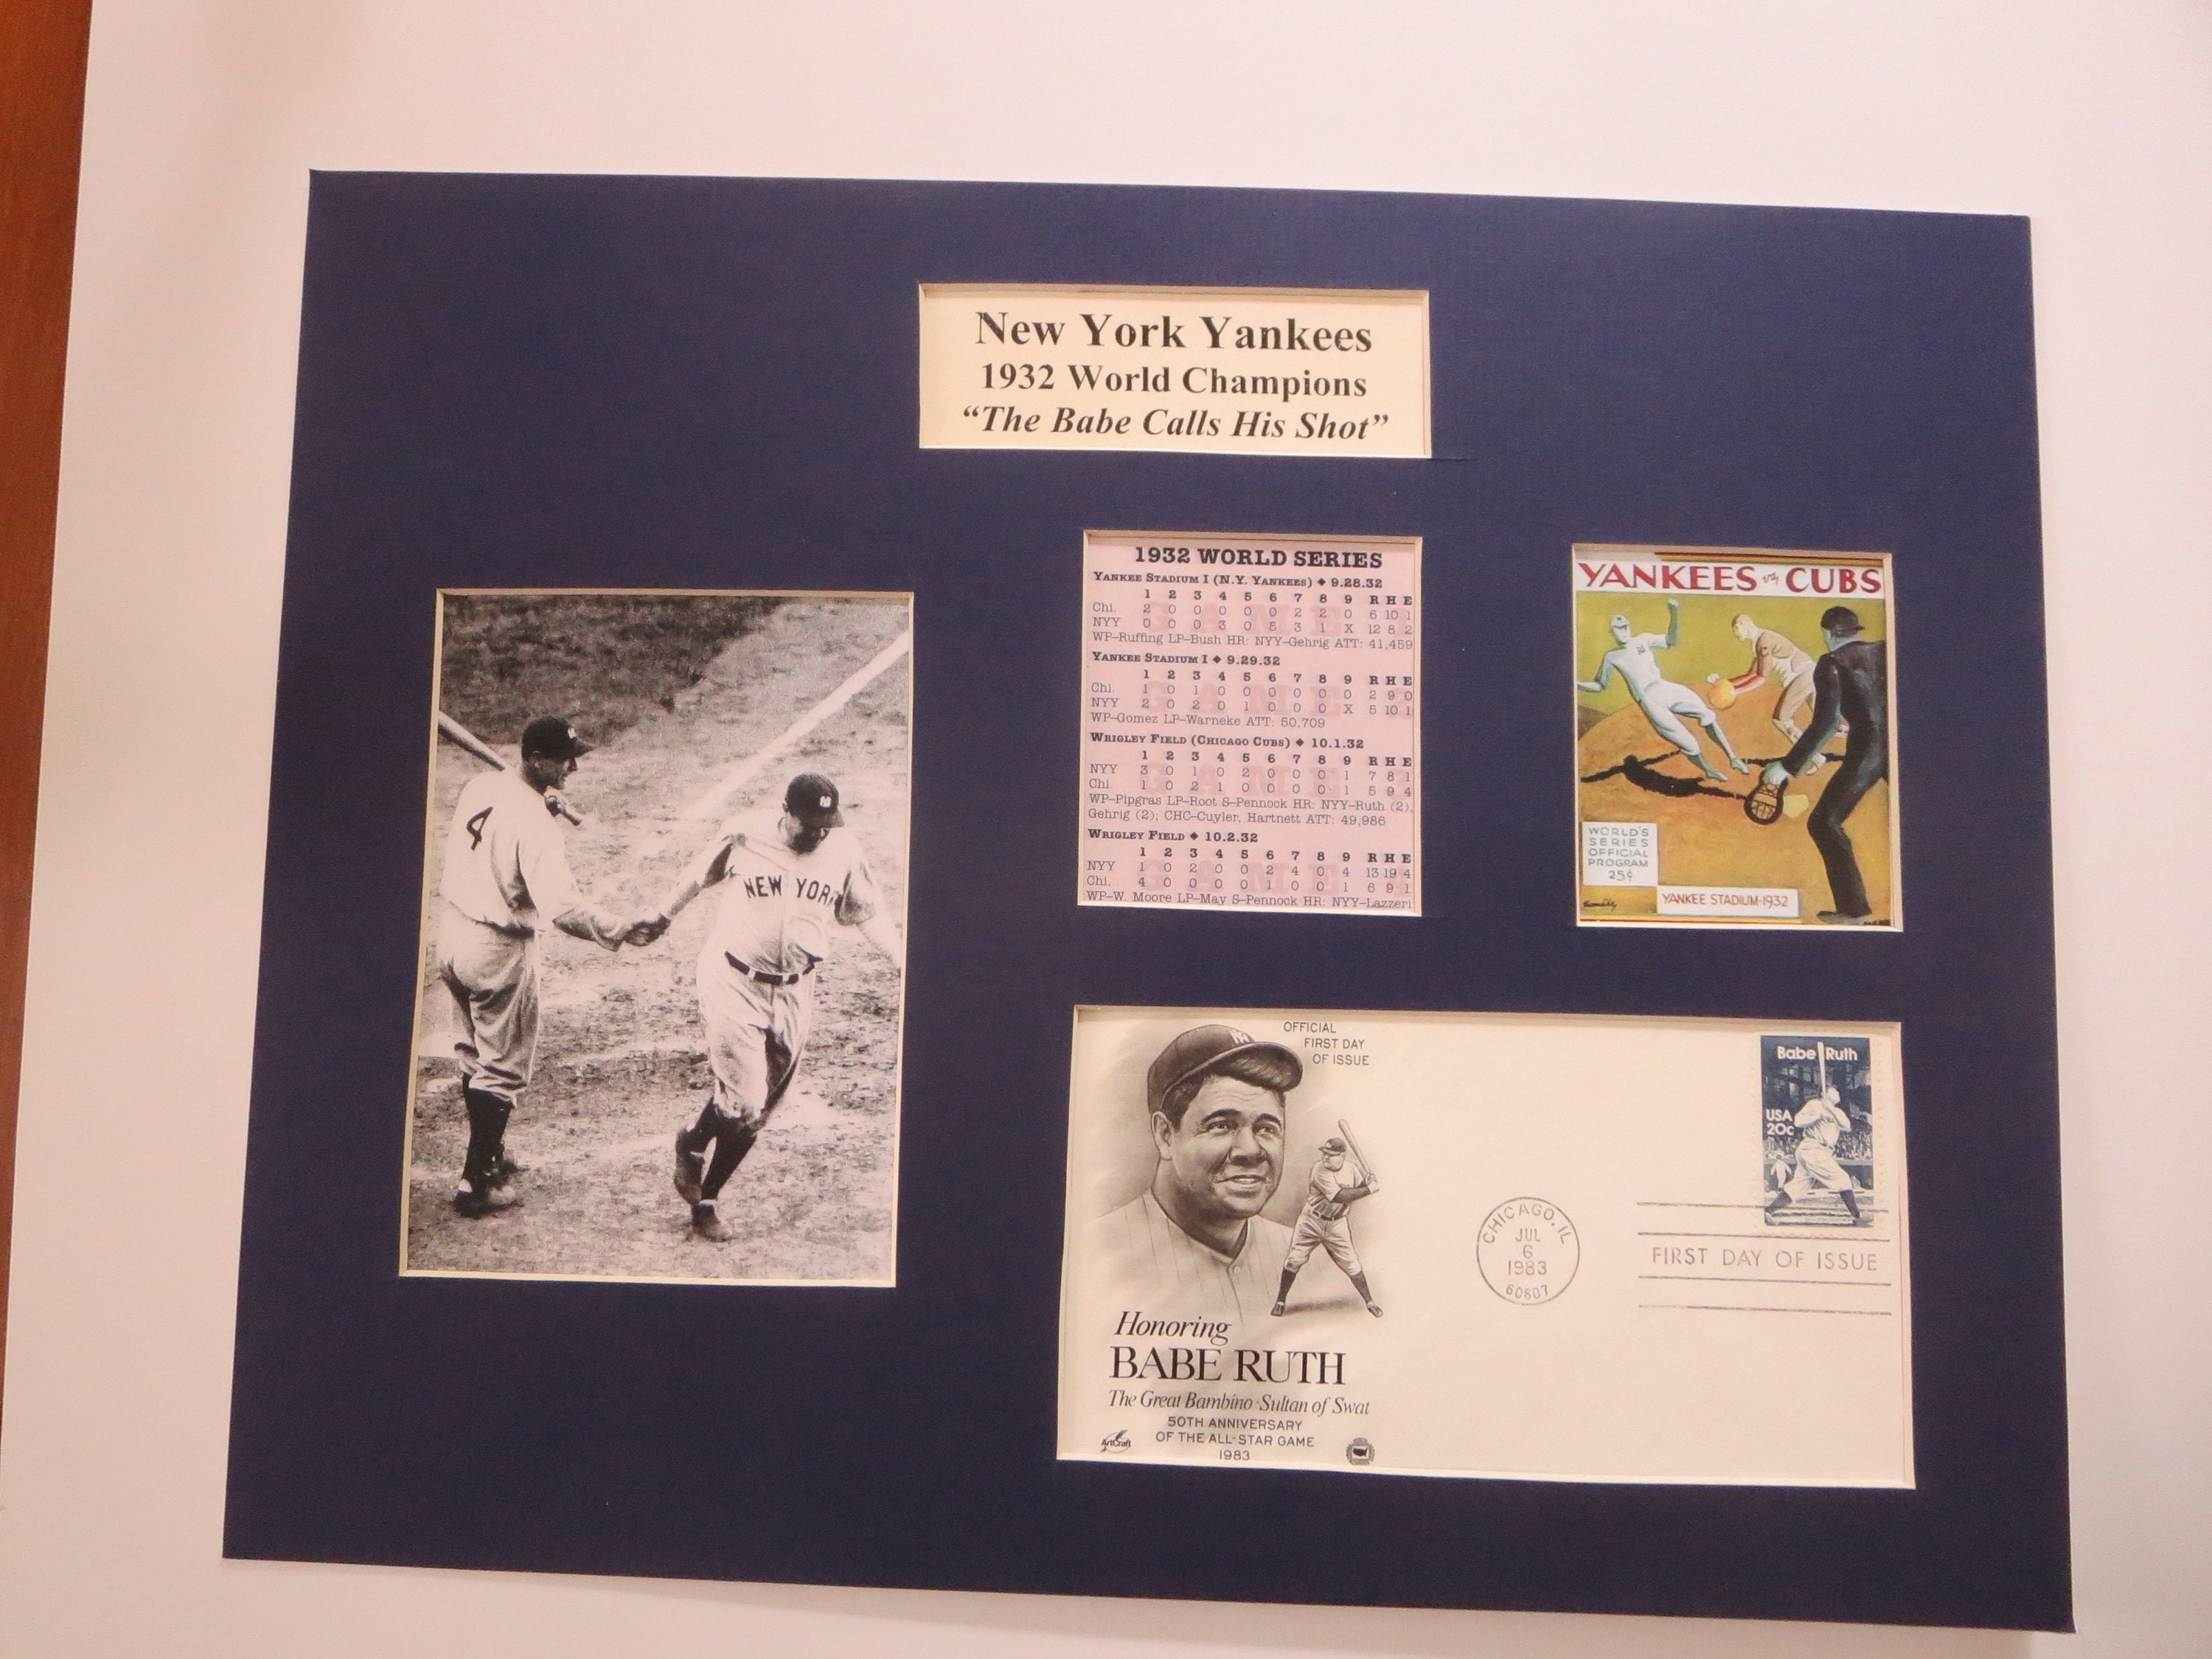 Babe Ruth calls his Shot - N.Y. Yankees are the 1932 World Champions &  First Day Cover of his own stamp